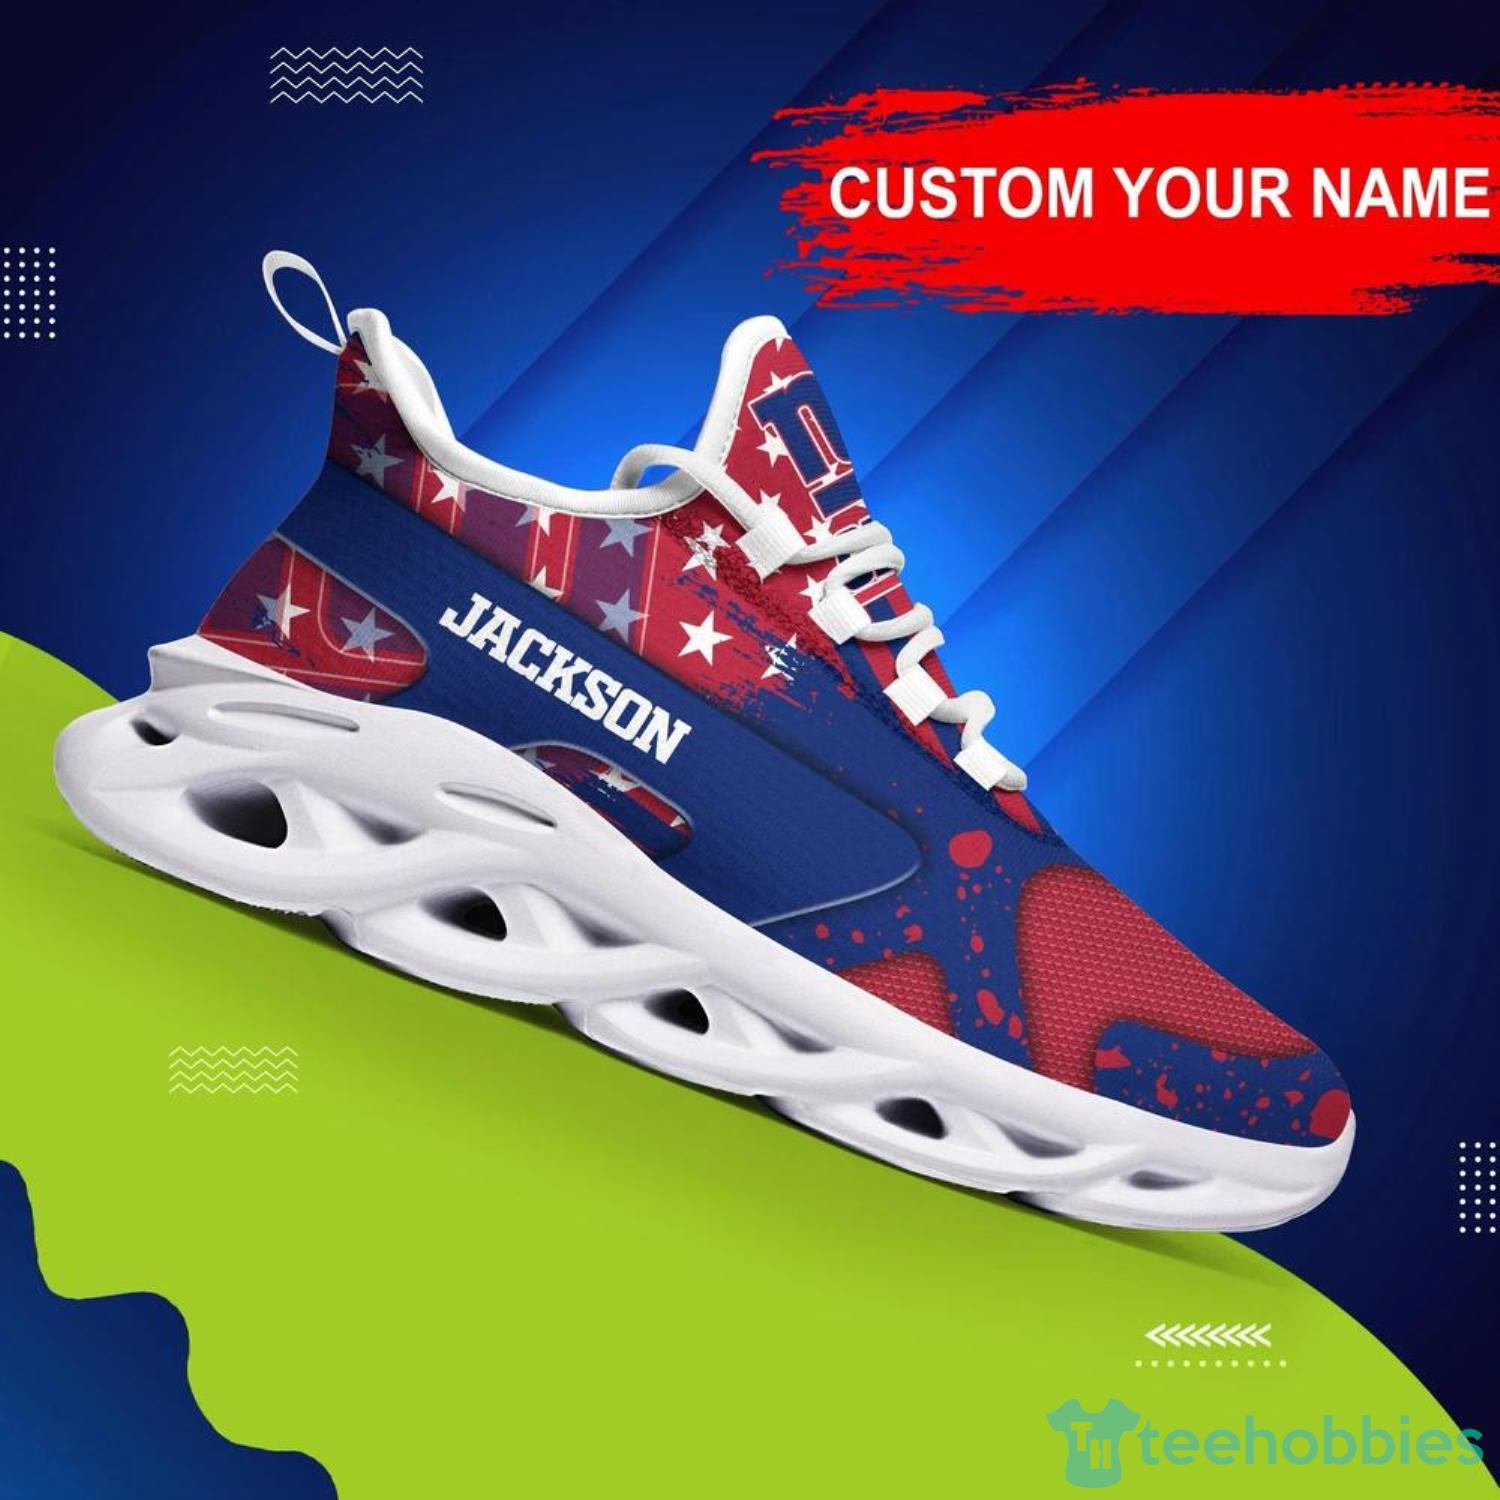 New York Giants NFL Max Soul Shoes American Flag Custom Name Sneakers For Men And Women - New York Giants NFL Max Soul Shoes Custom Name, Sneakers Hot Trending Personalized Gifts For NFL Fans_1